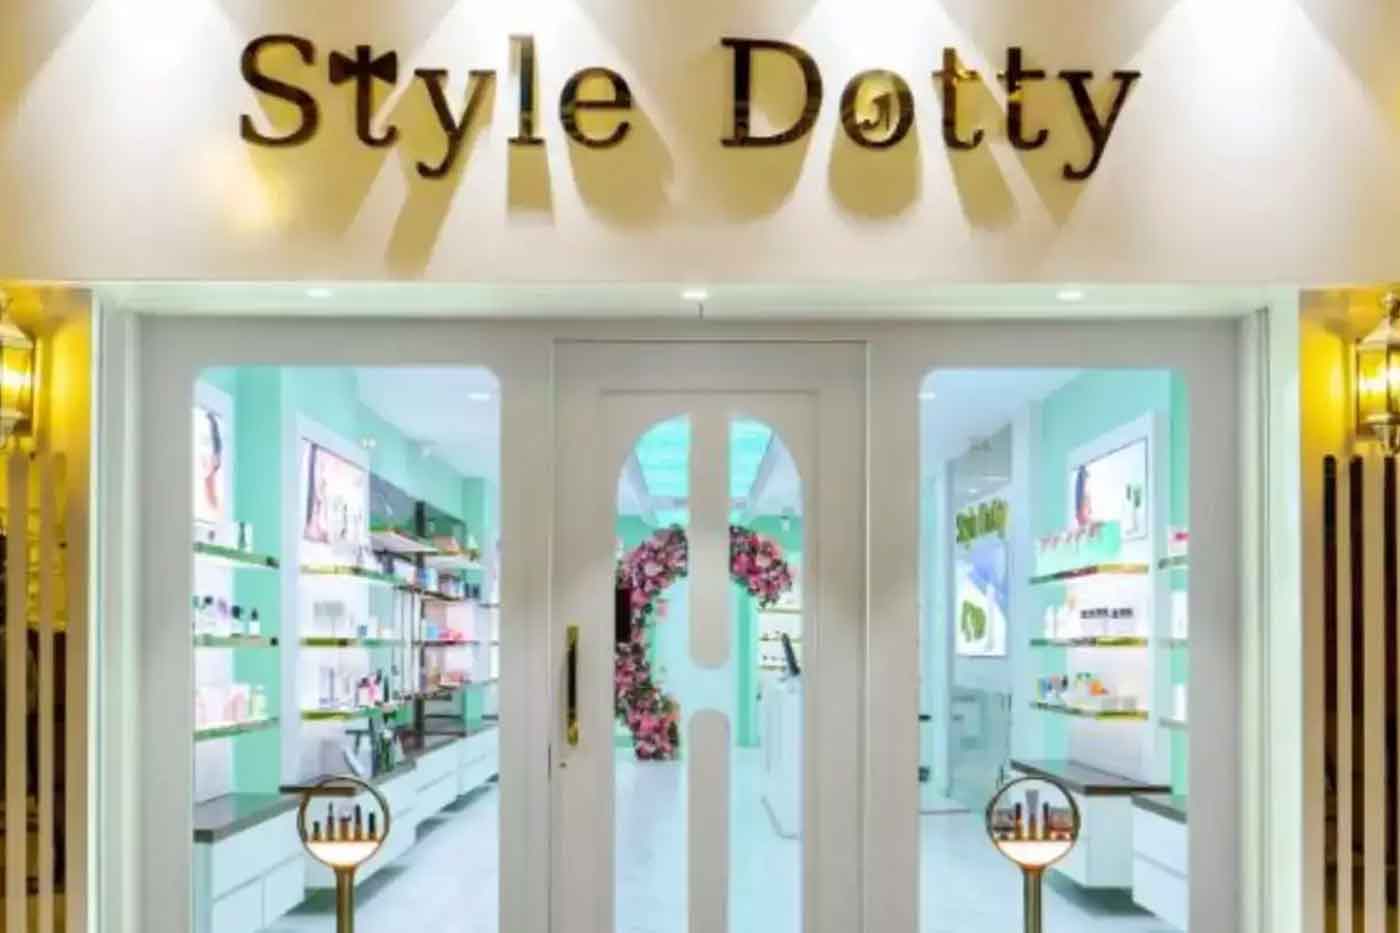 StyleDotty launches first O2OX boutique in India